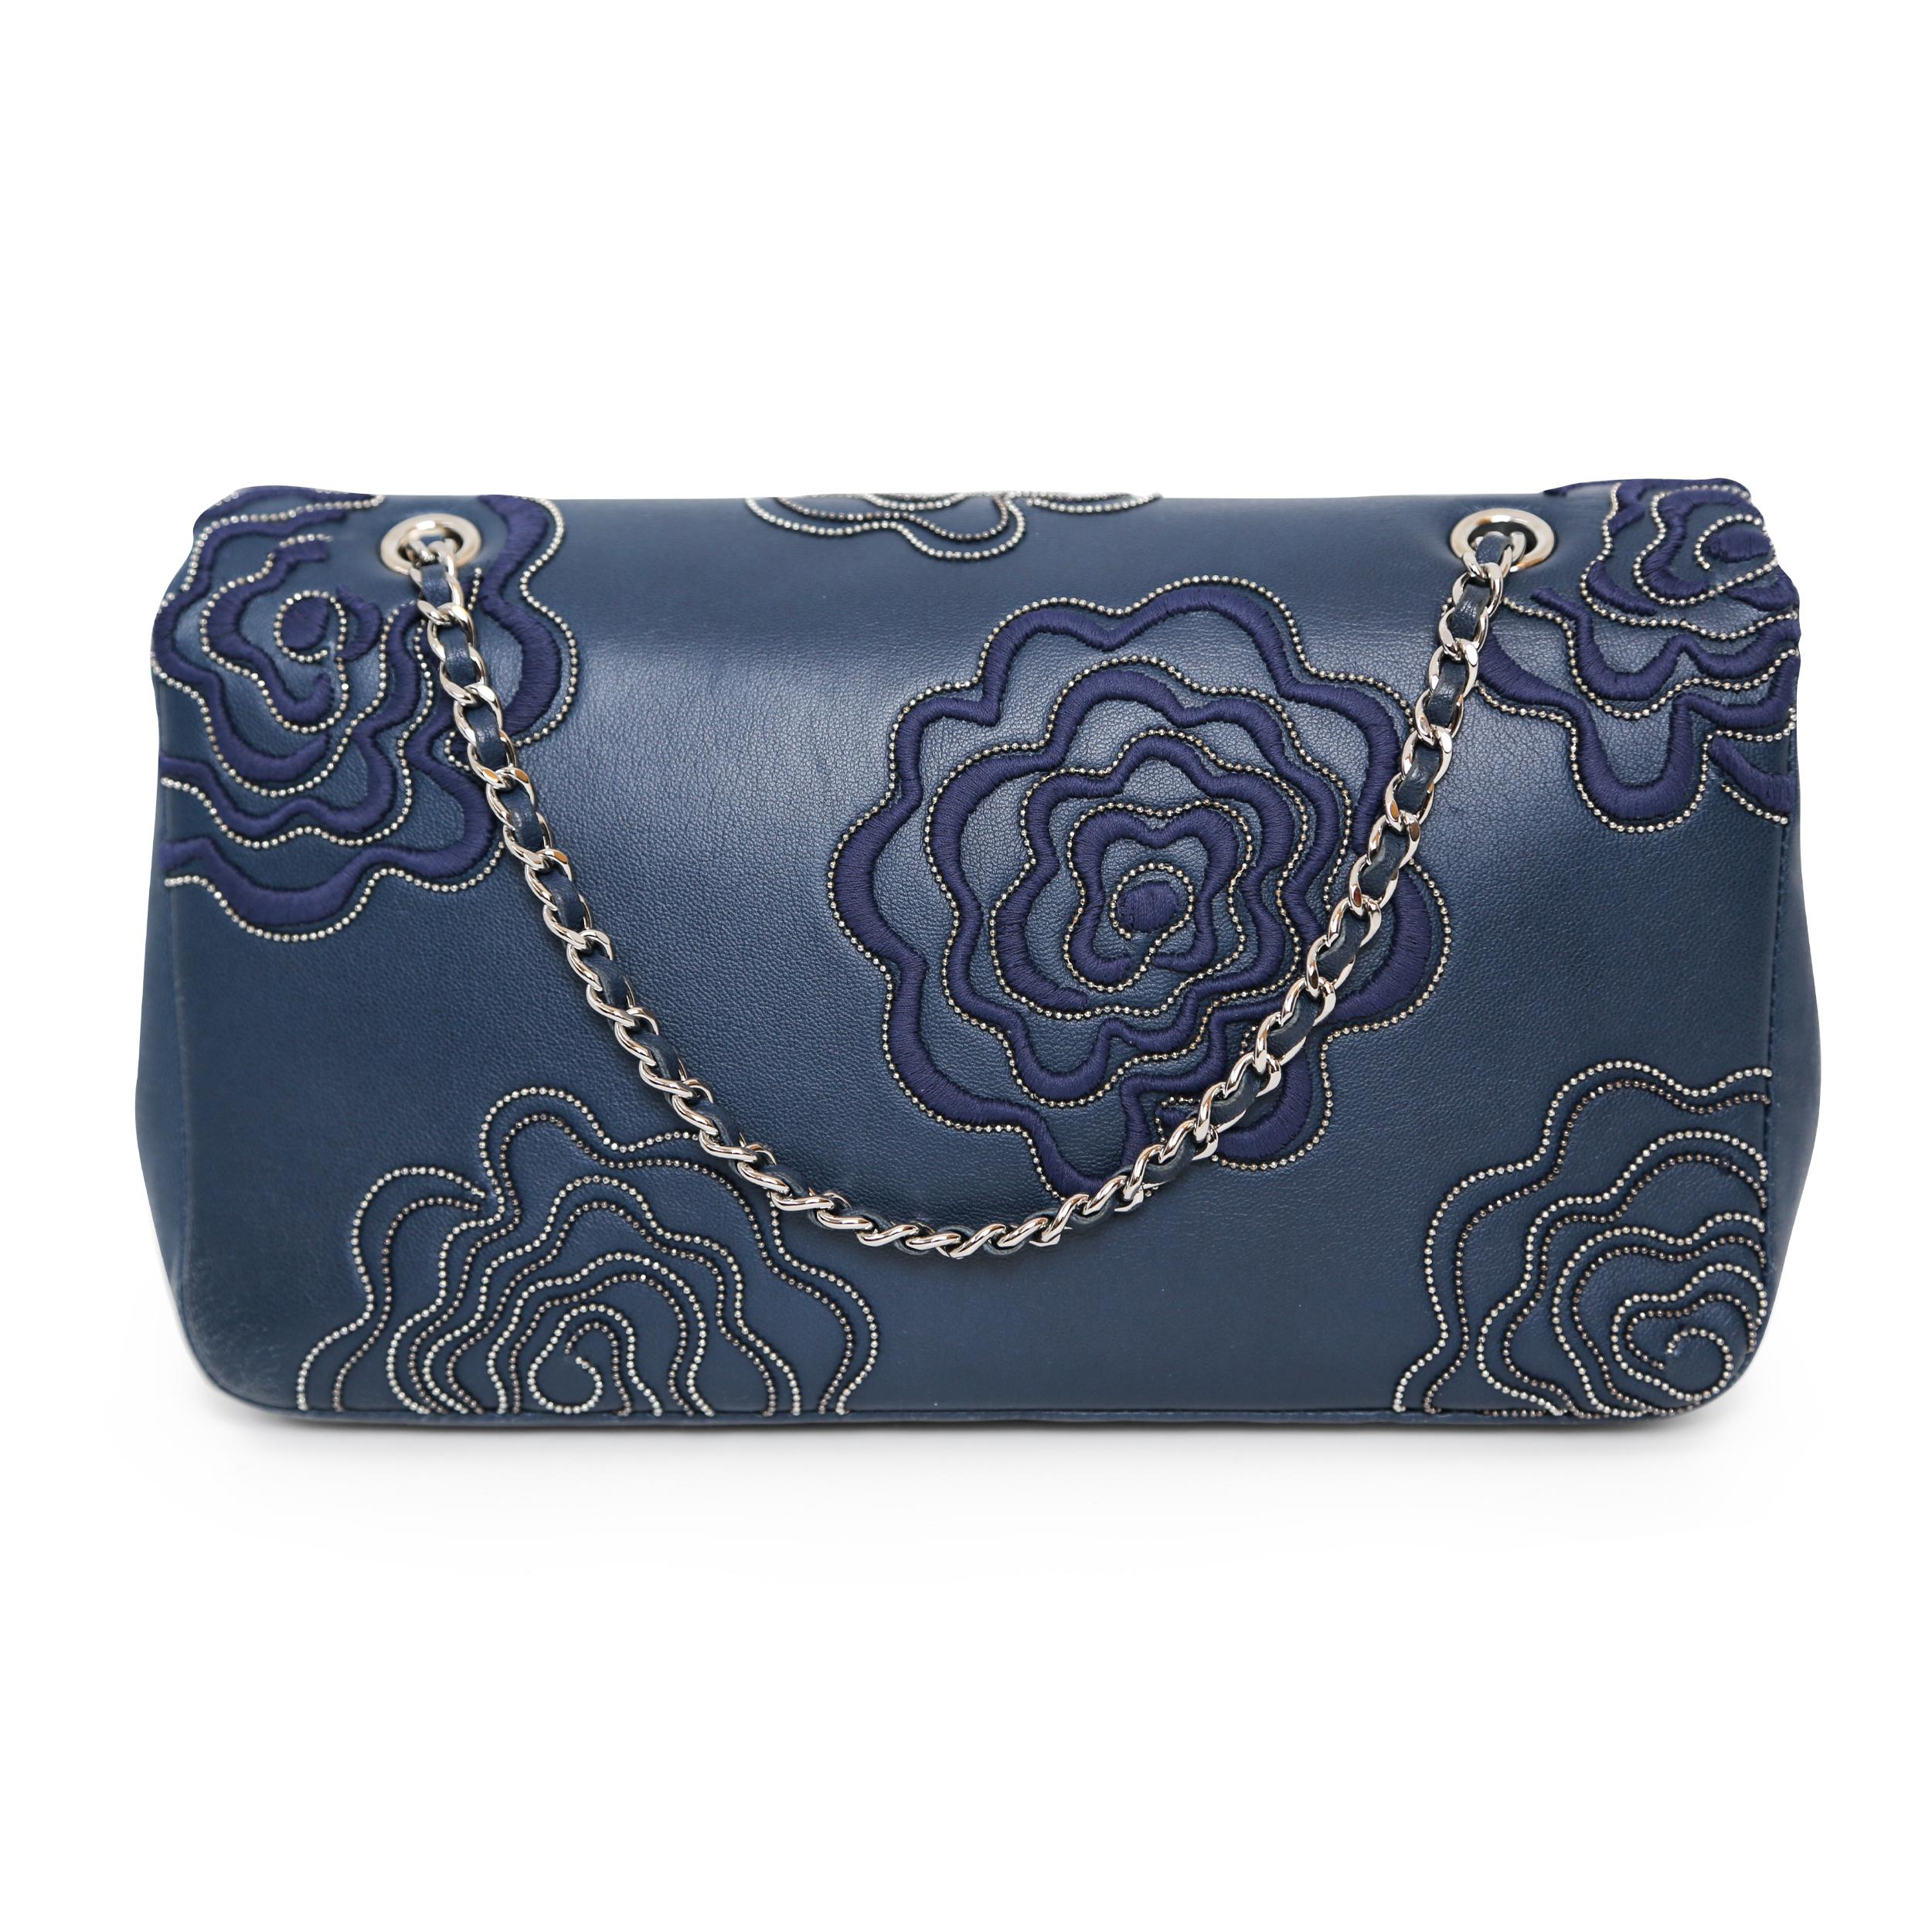 This Chanel flap bag features stunning embroidered and beaded camellias. There is an internal zippered pocket. It is in excellent condition.

*The front flap features the iconic CC logo with a silver-tone twist lock
*Silver hardware
*Lined with navy